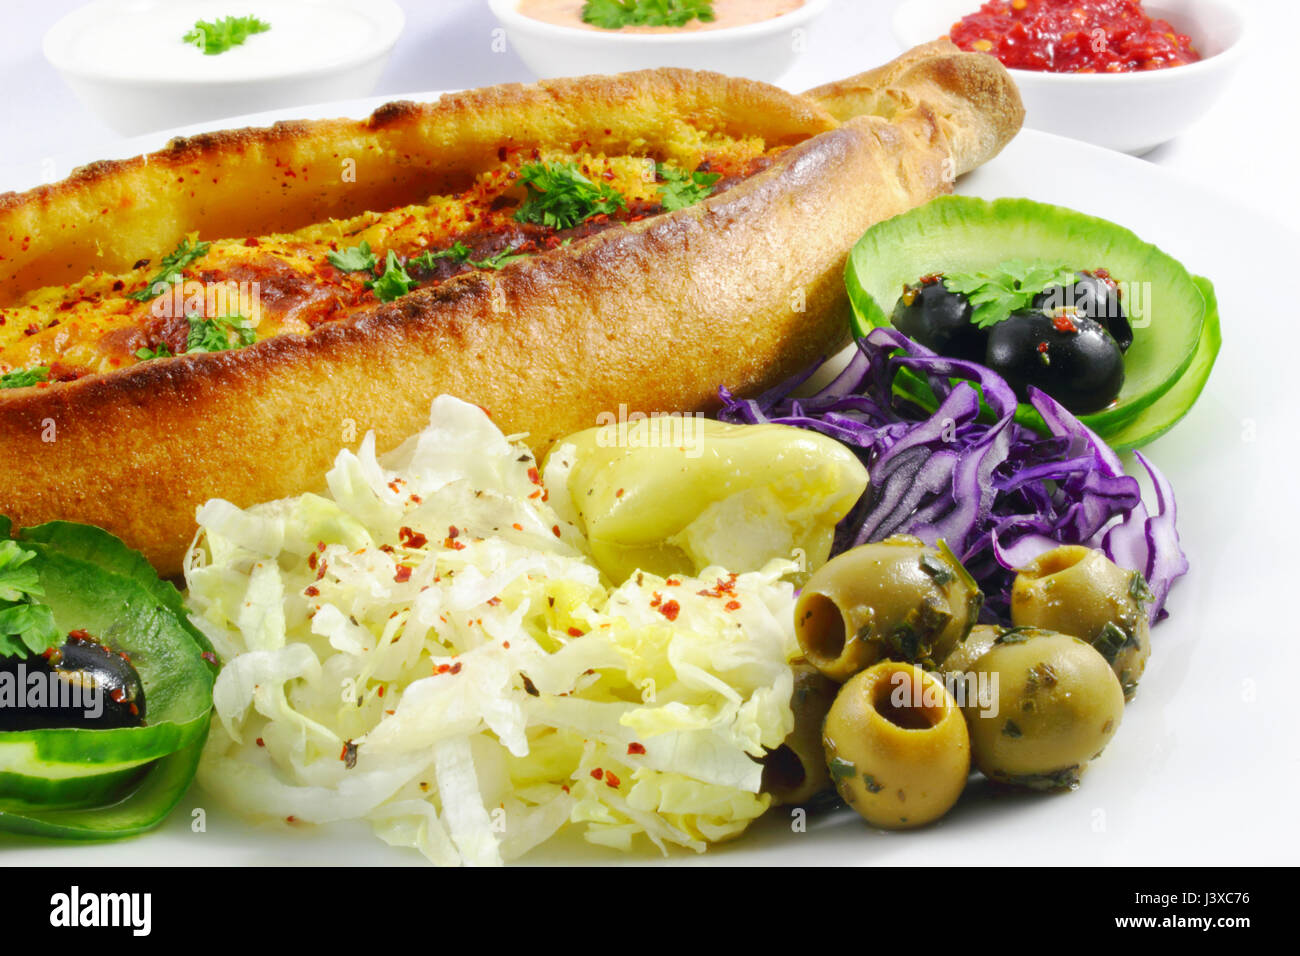 turkish pide with cheese, iceberg salad, olives, red cabbage and cucumber Stock Photo